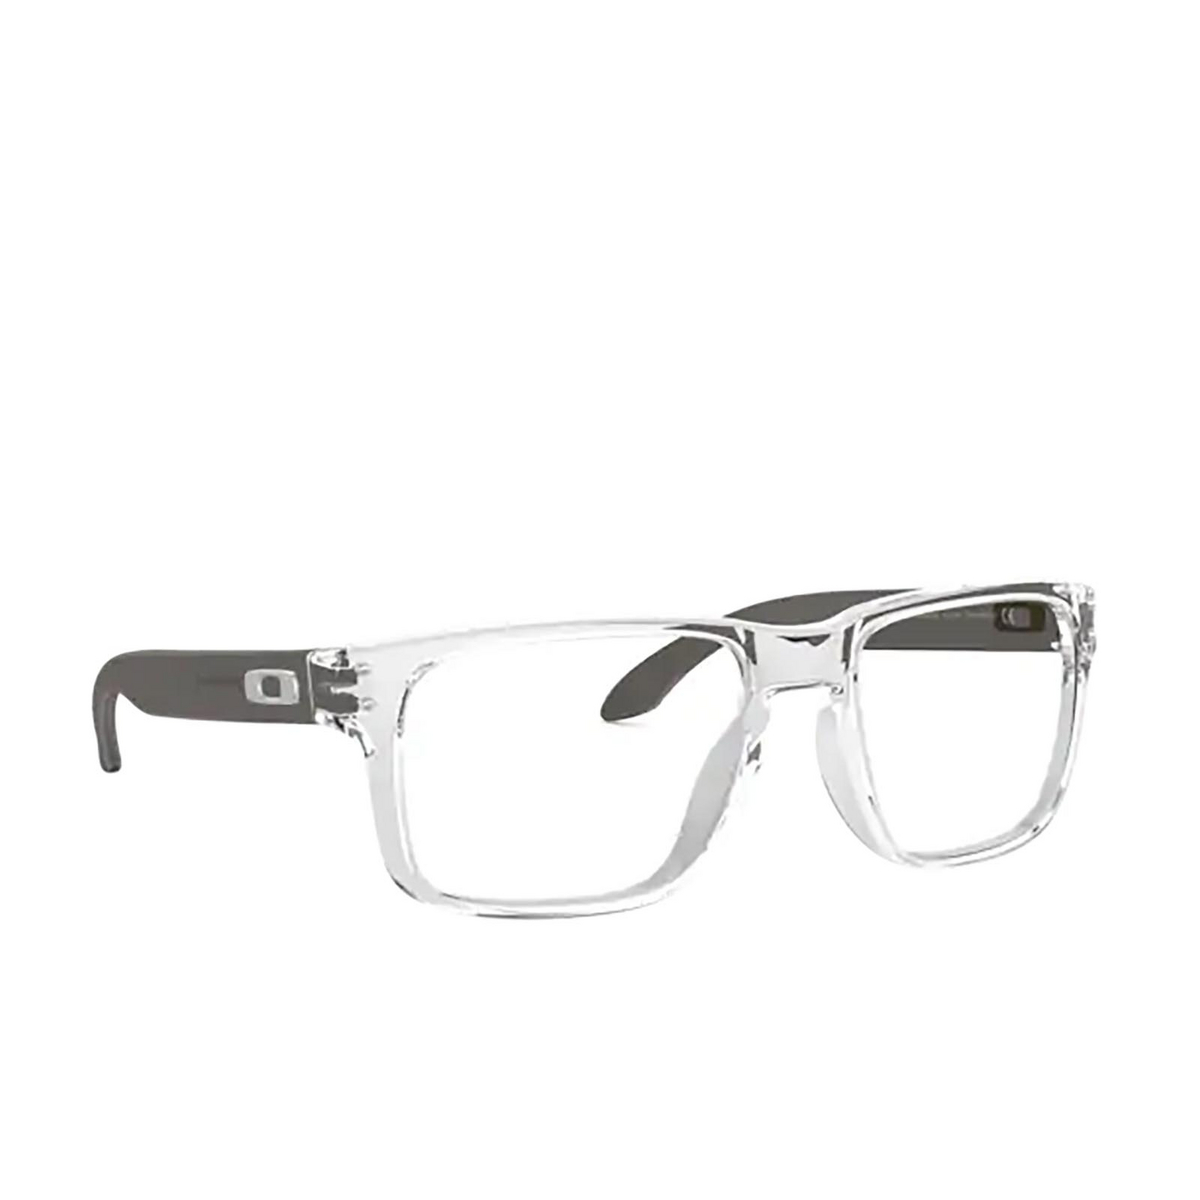 Oakley® Square Eyeglasses: Holbrook Rx OX8156 color Polished Clear 815603 - three-quarters view.